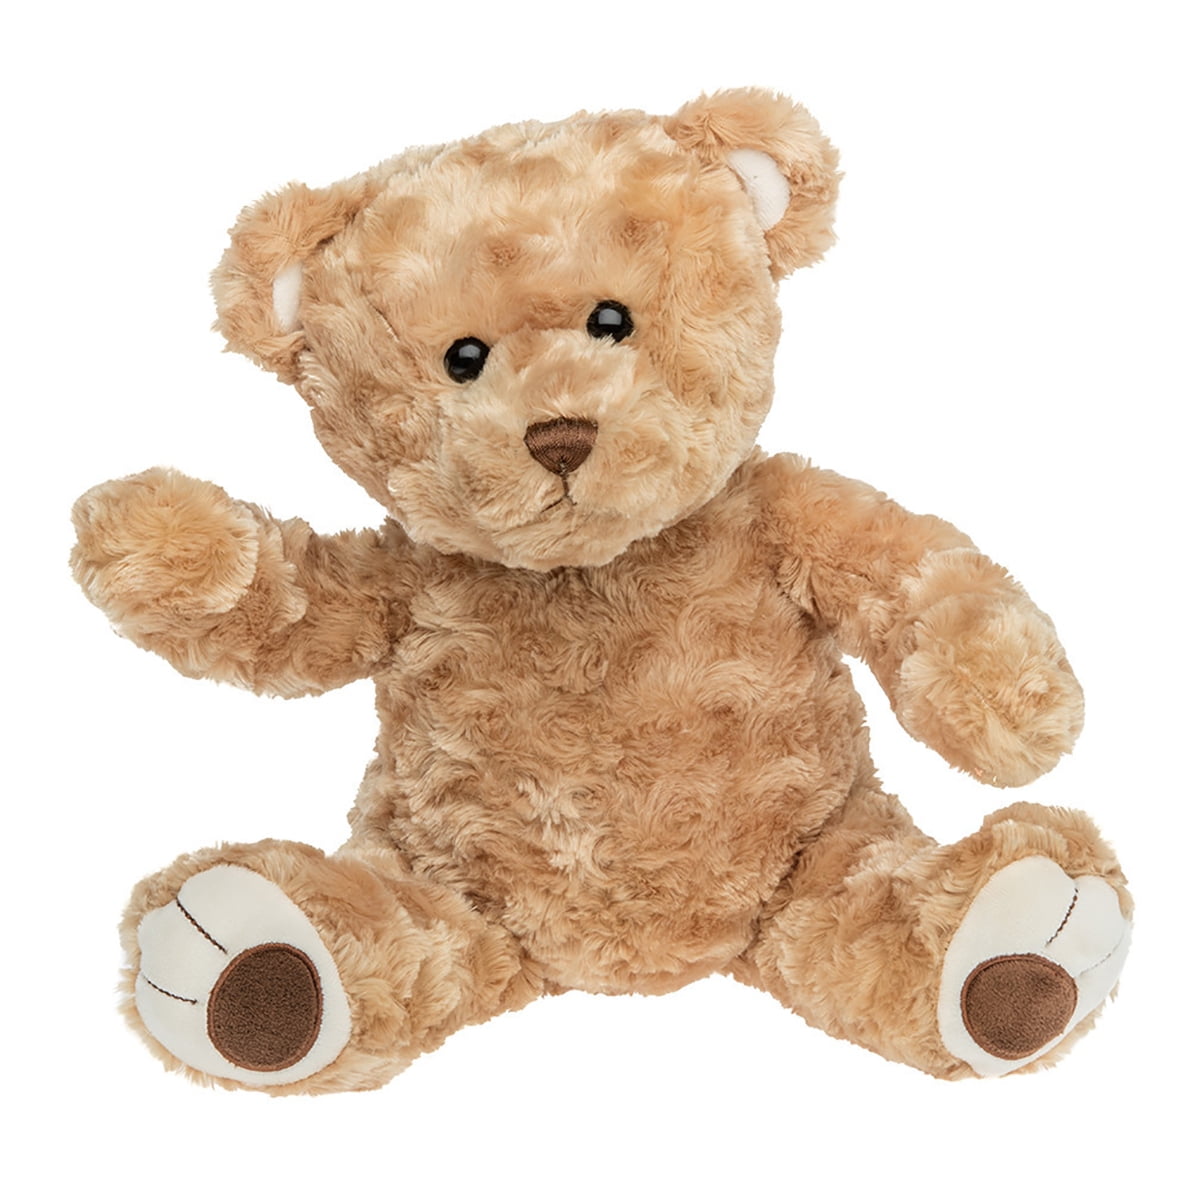 Ready To Love In A Few Easy Steps T Record Your Own Plush 16 inch Brown Bear 